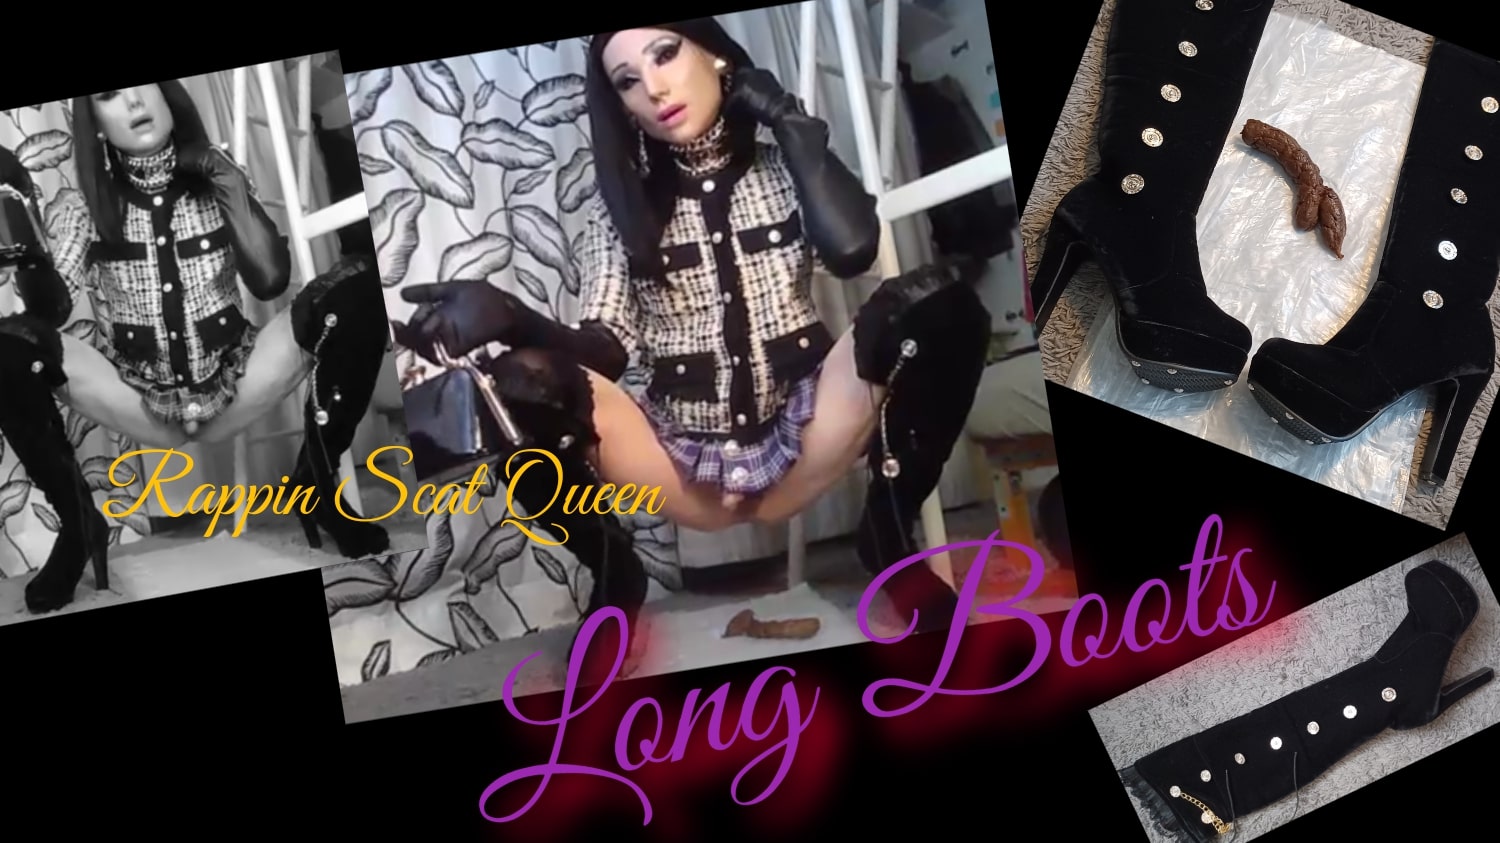 Rappin Scat Queen " The Long BOOTS Shitting"